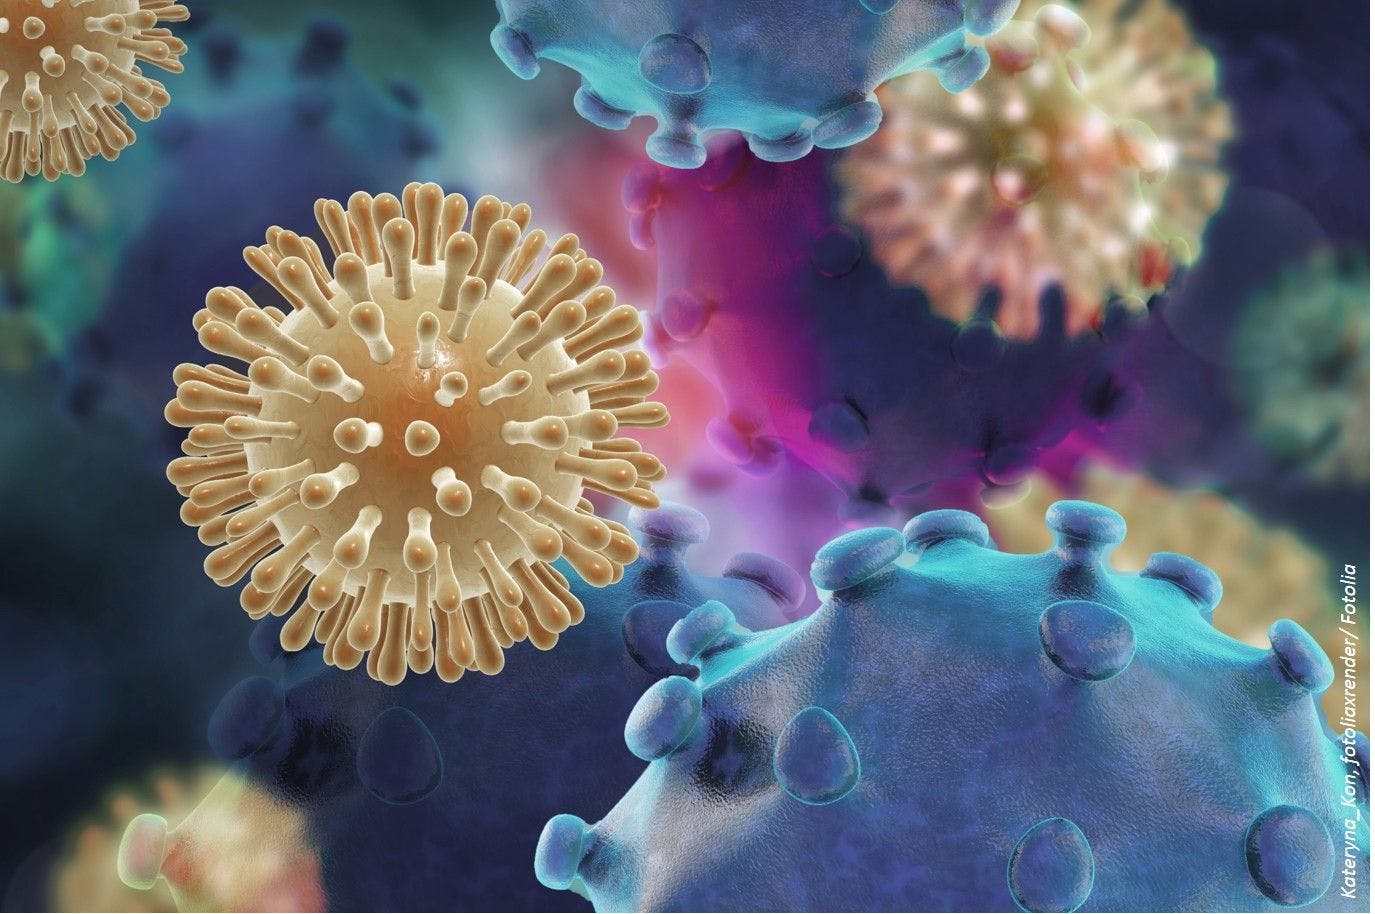 Hepatitis C Virus Retreatment Successful with SOF/VEL/VOX in Patients With and Without HIV 